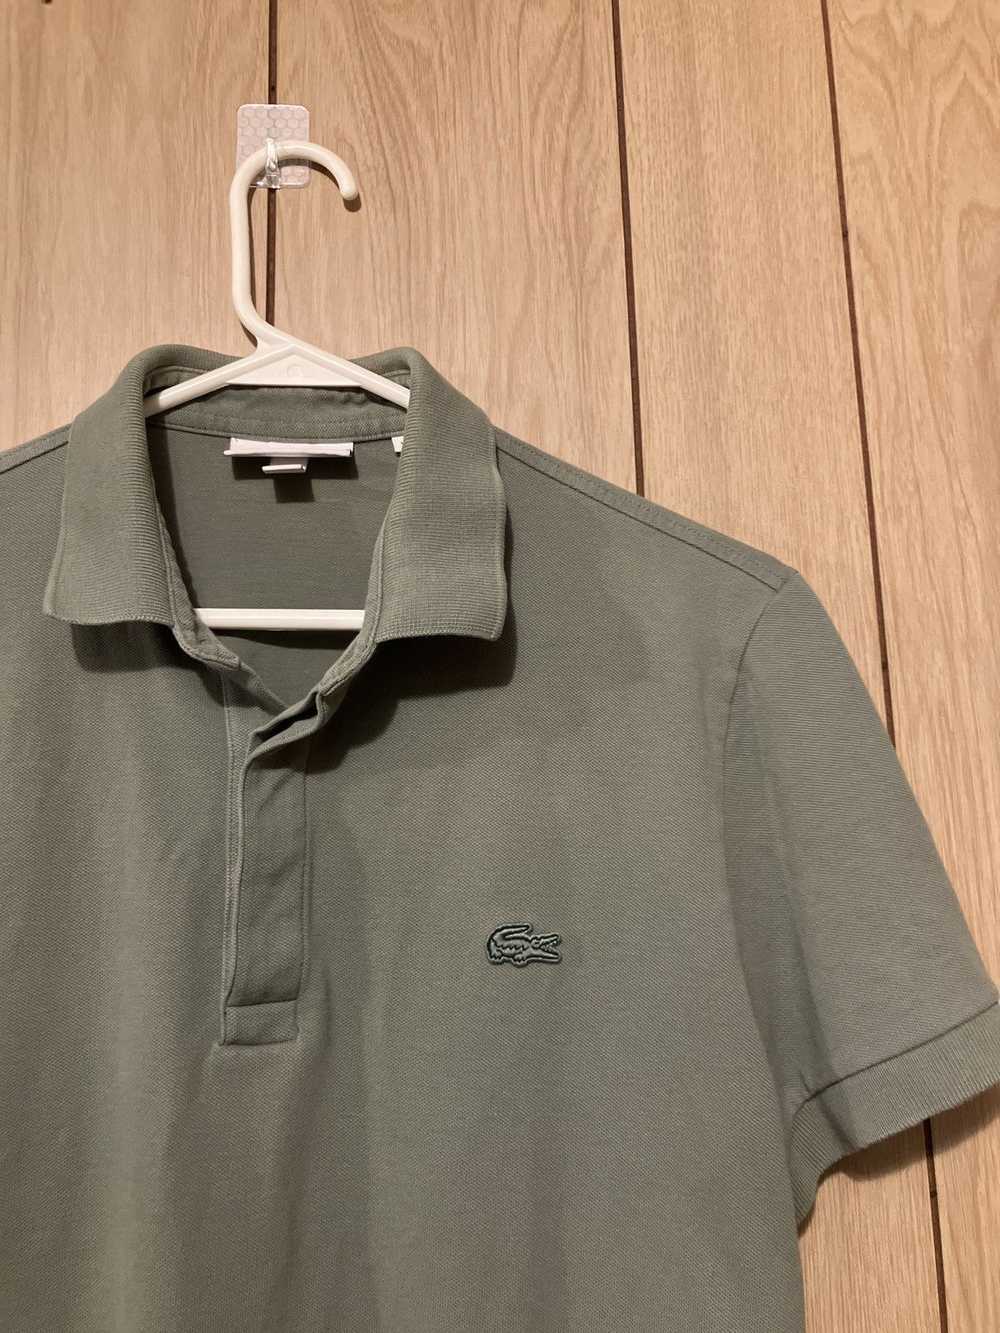 Lacoste Lacoste Polo Shirt. Small - image 2